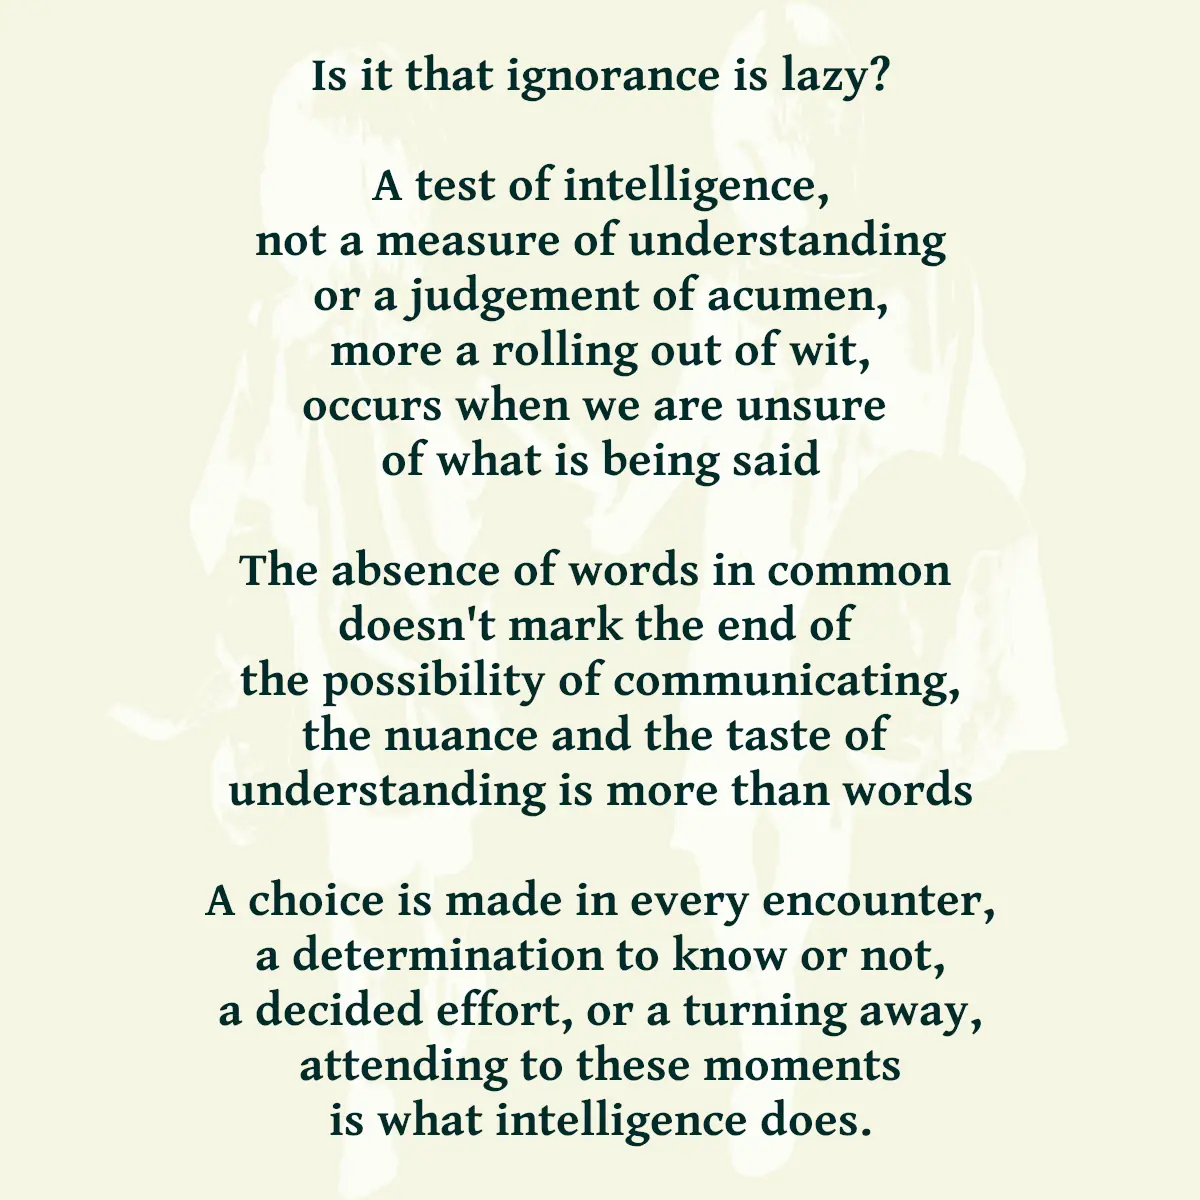 Is it that ignorance is lazy? A test of intelligence, not a measure of perception or a judgement of acumen, more a rolling out of wit, occurs when we are unsure of what is being said The absence of words in common doesn't mark the end of the possibility of communicating, the nuance and the taste of understanding is more than words A choice is made in every encounter, a determination to know or not, a decided effort, or a turning away, attending to these moments is what intelligence does.